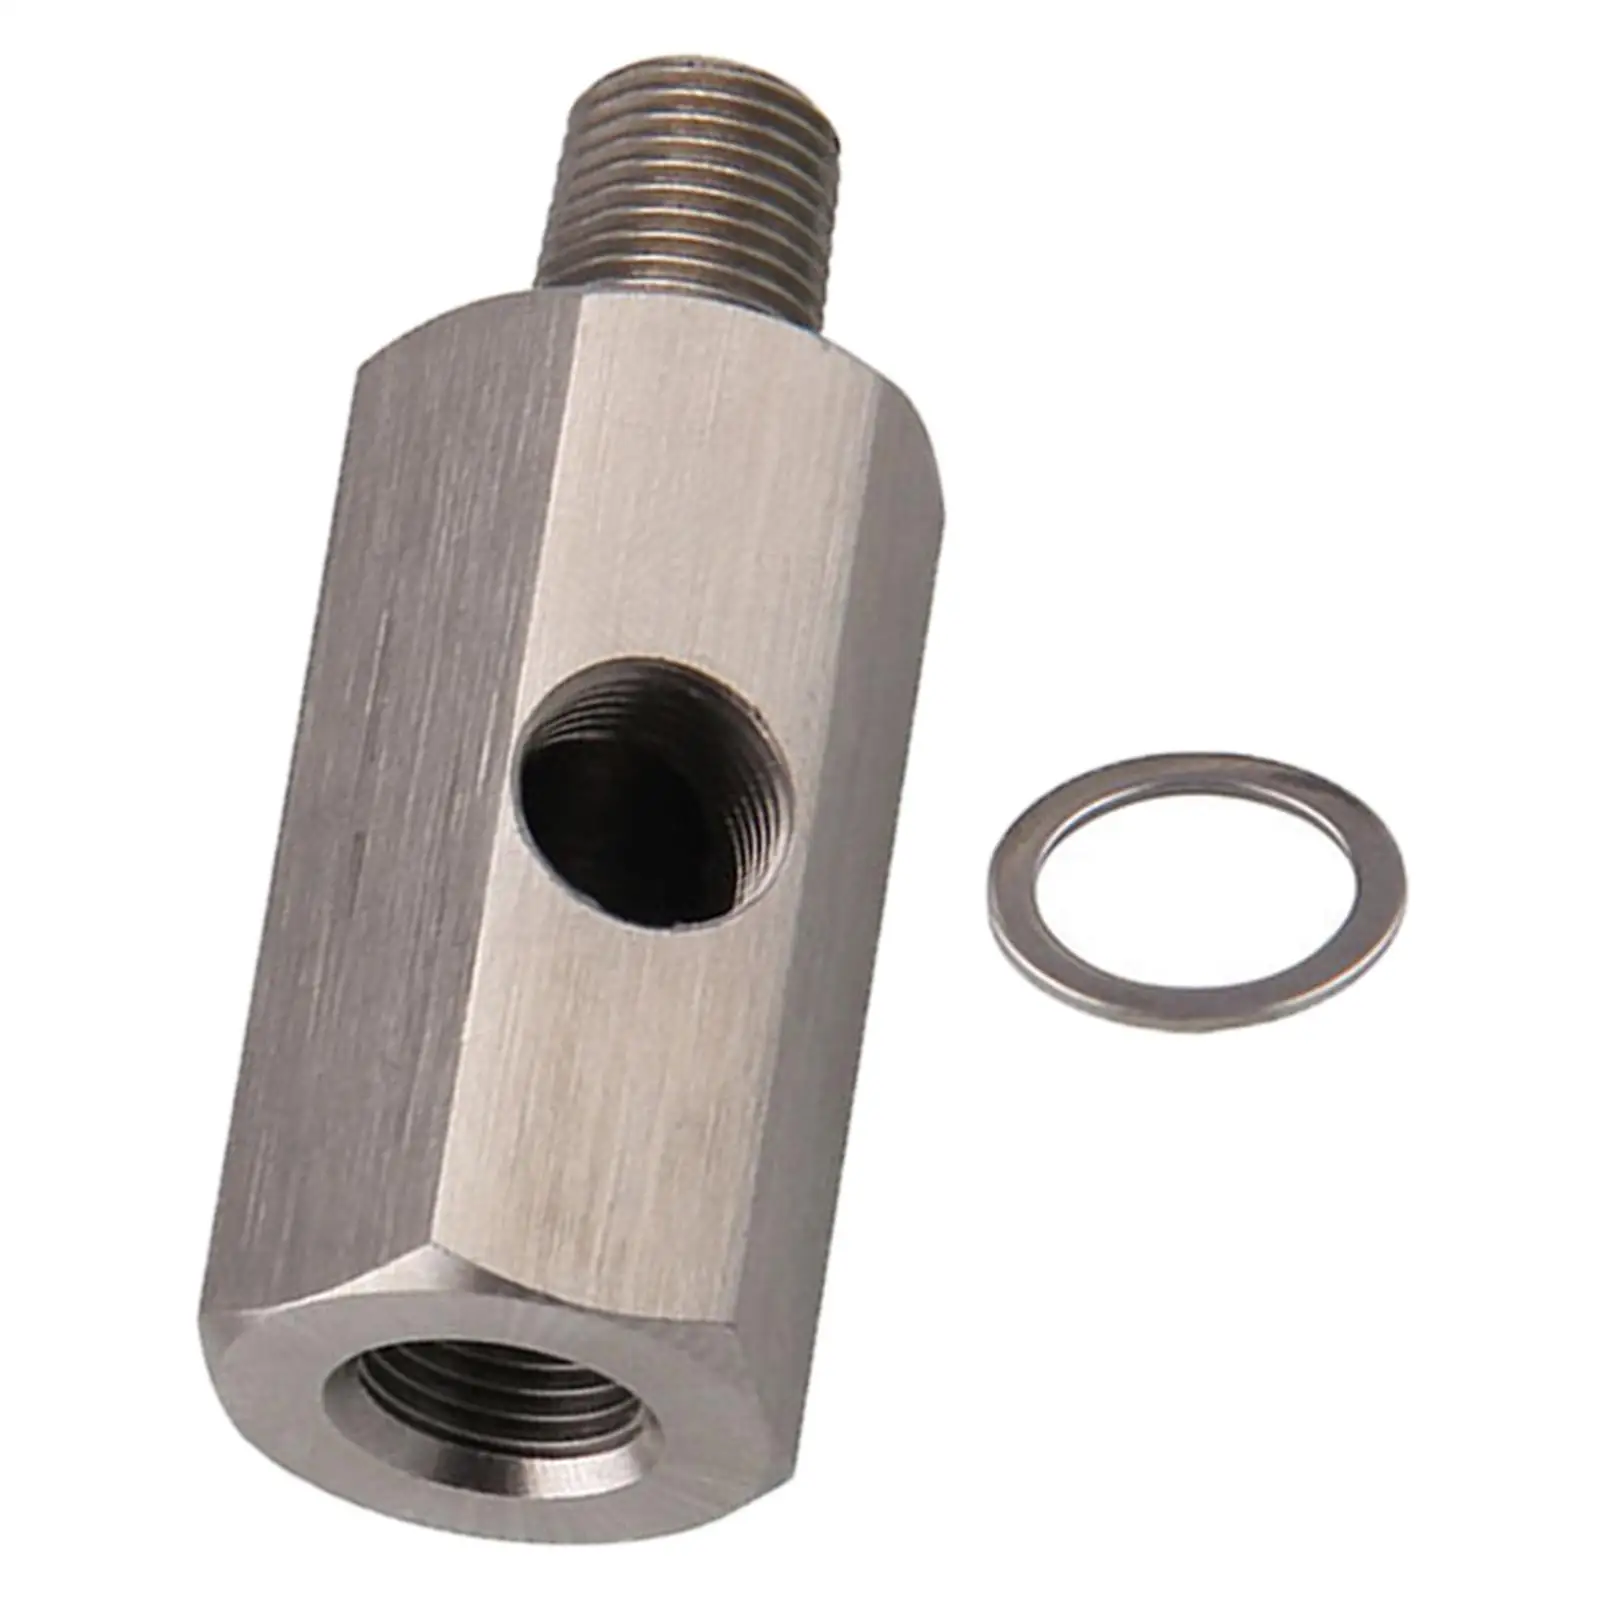 Oil Pressure Sensor  Adapter Fitting 1/8 inch NPT   feed Line  Direct Replaces Easy to Install